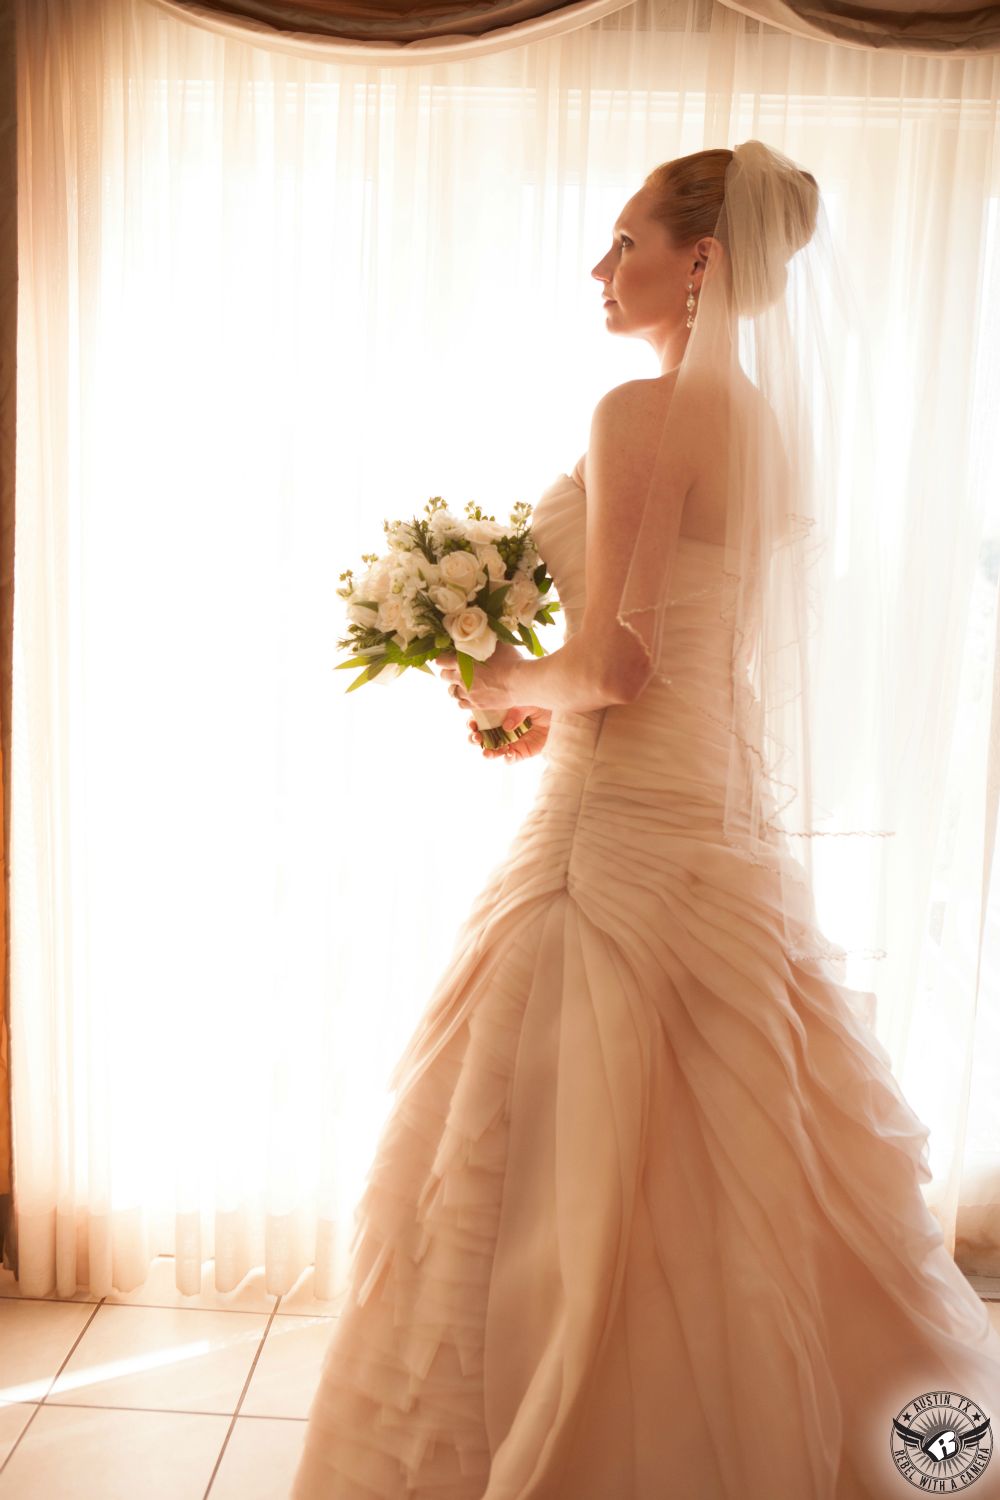 Austin wedding photography of bride in elegant, light pink, ruffled wedding dress with long bridal veil with bridal bouquet by Verbena Floral Design Austin wedding florist stands in front of window in the bride's room at Vintage Villas wedding venue near Lake Travis.